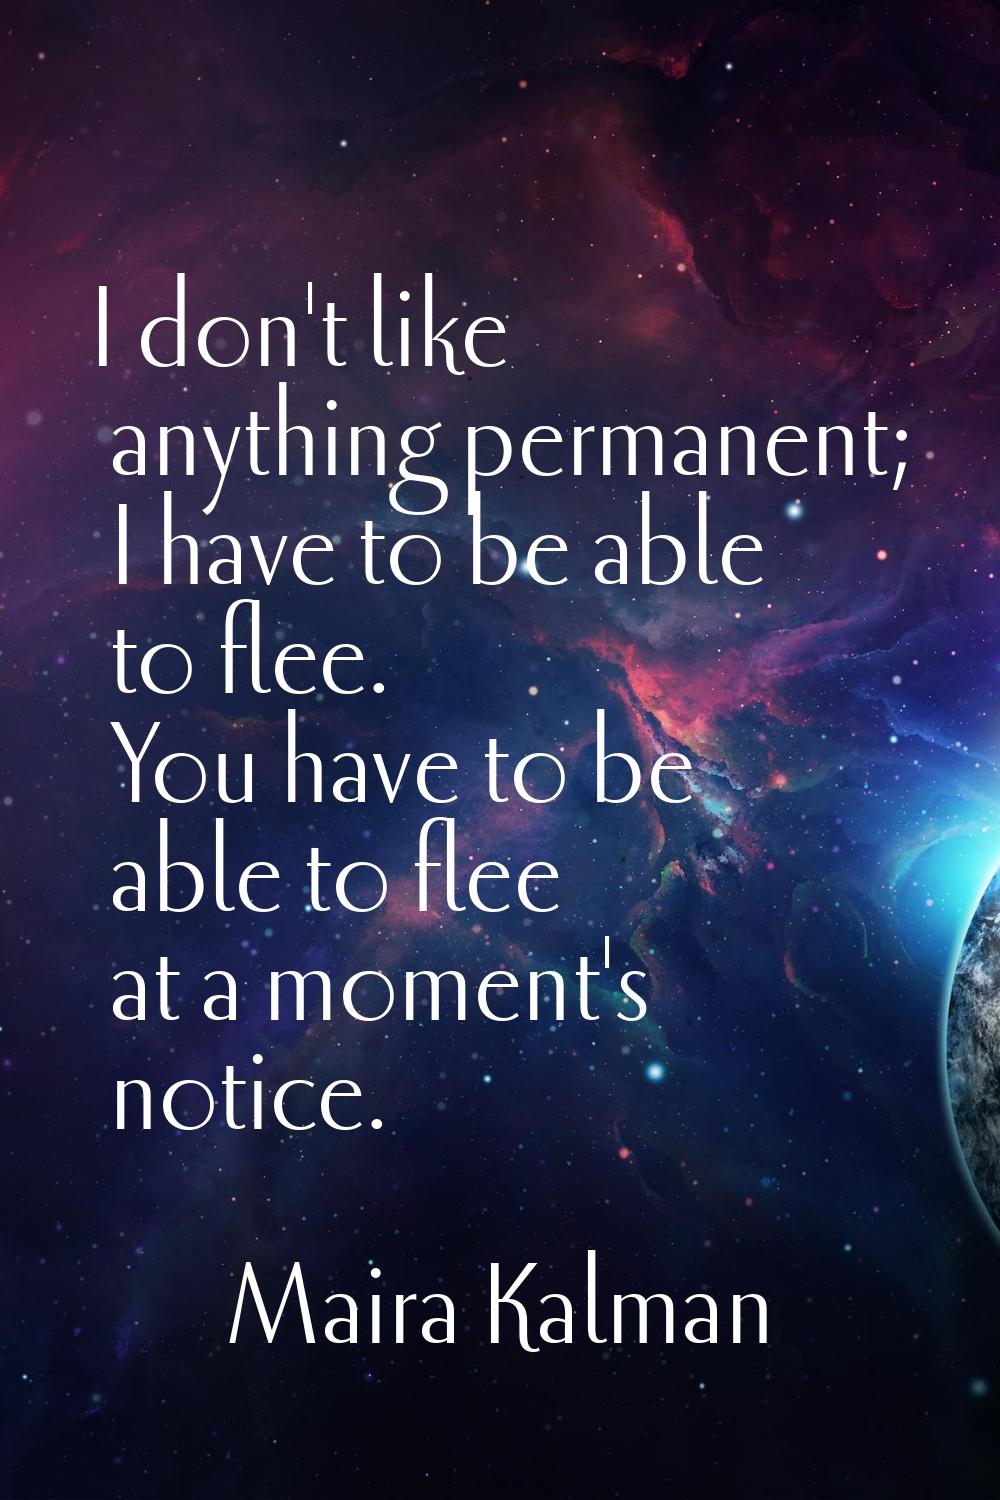 I don't like anything permanent; I have to be able to flee. You have to be able to flee at a moment